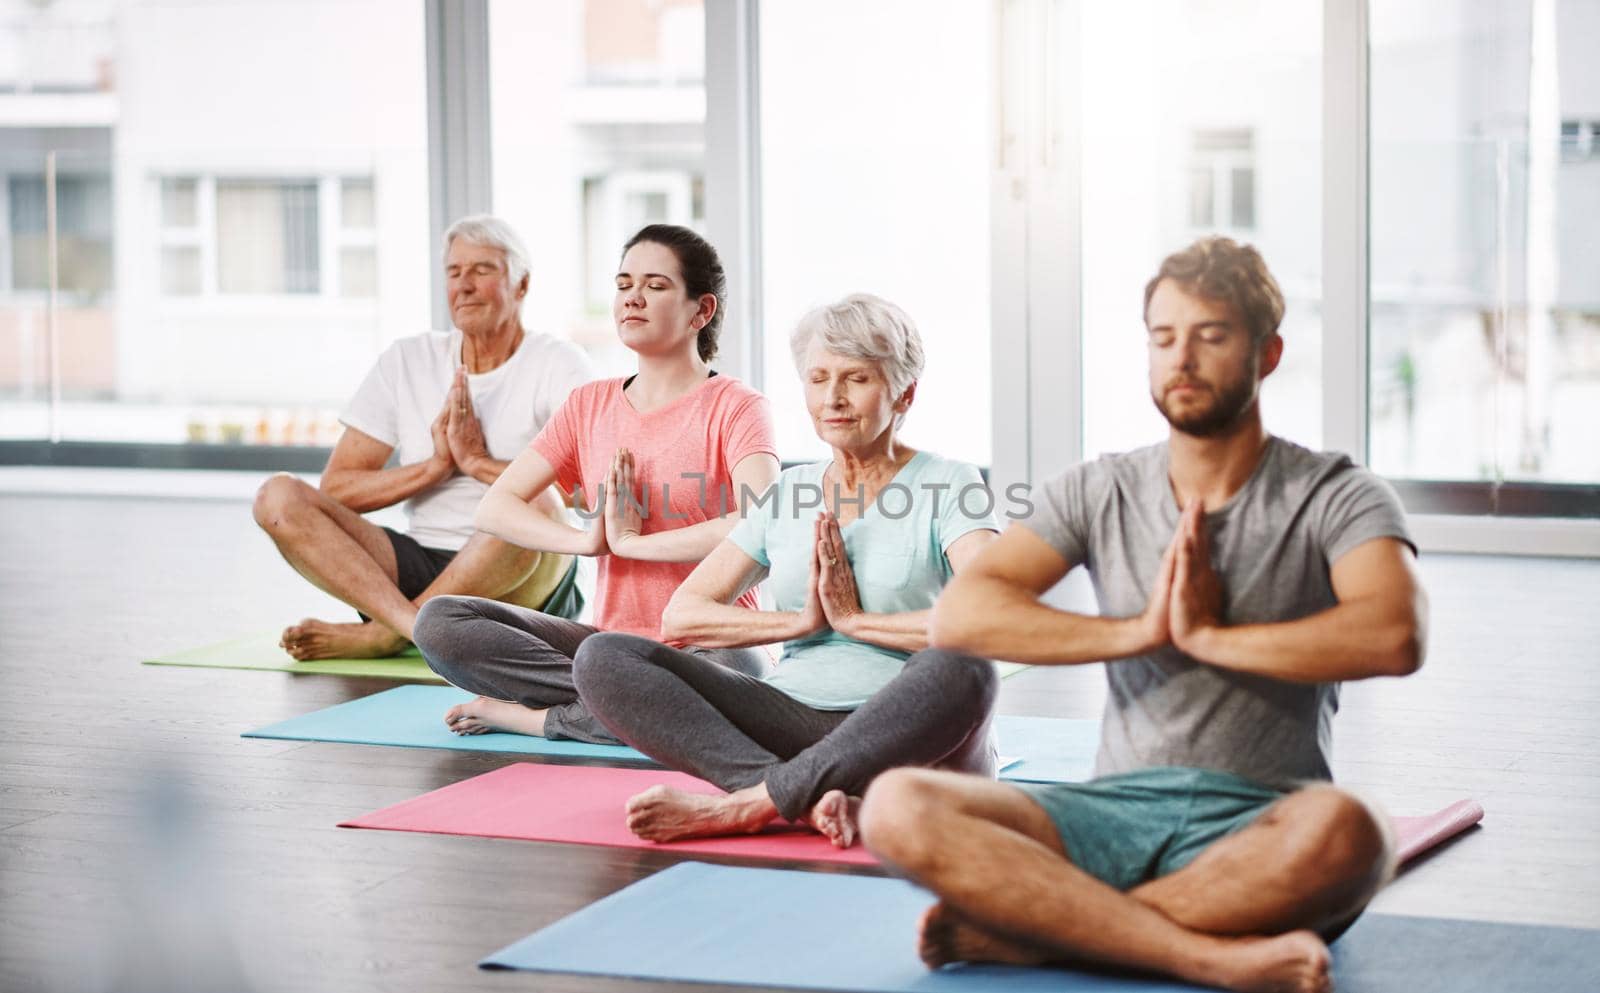 Full length shot of a group of people meditating while practicing yoga.